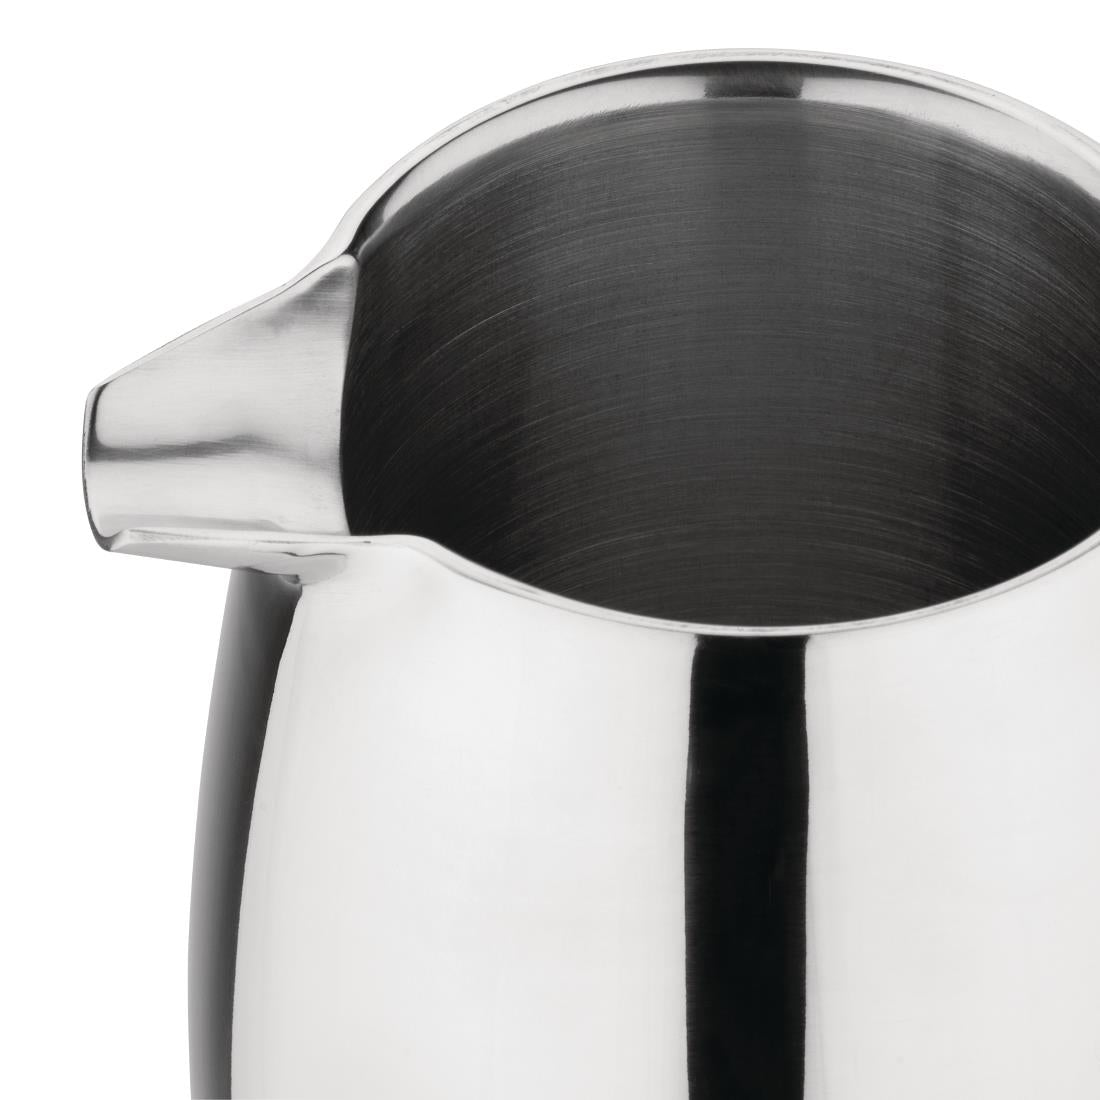 W837 Olympia Insulated Stainless Steel Cafetiere 6 Cup